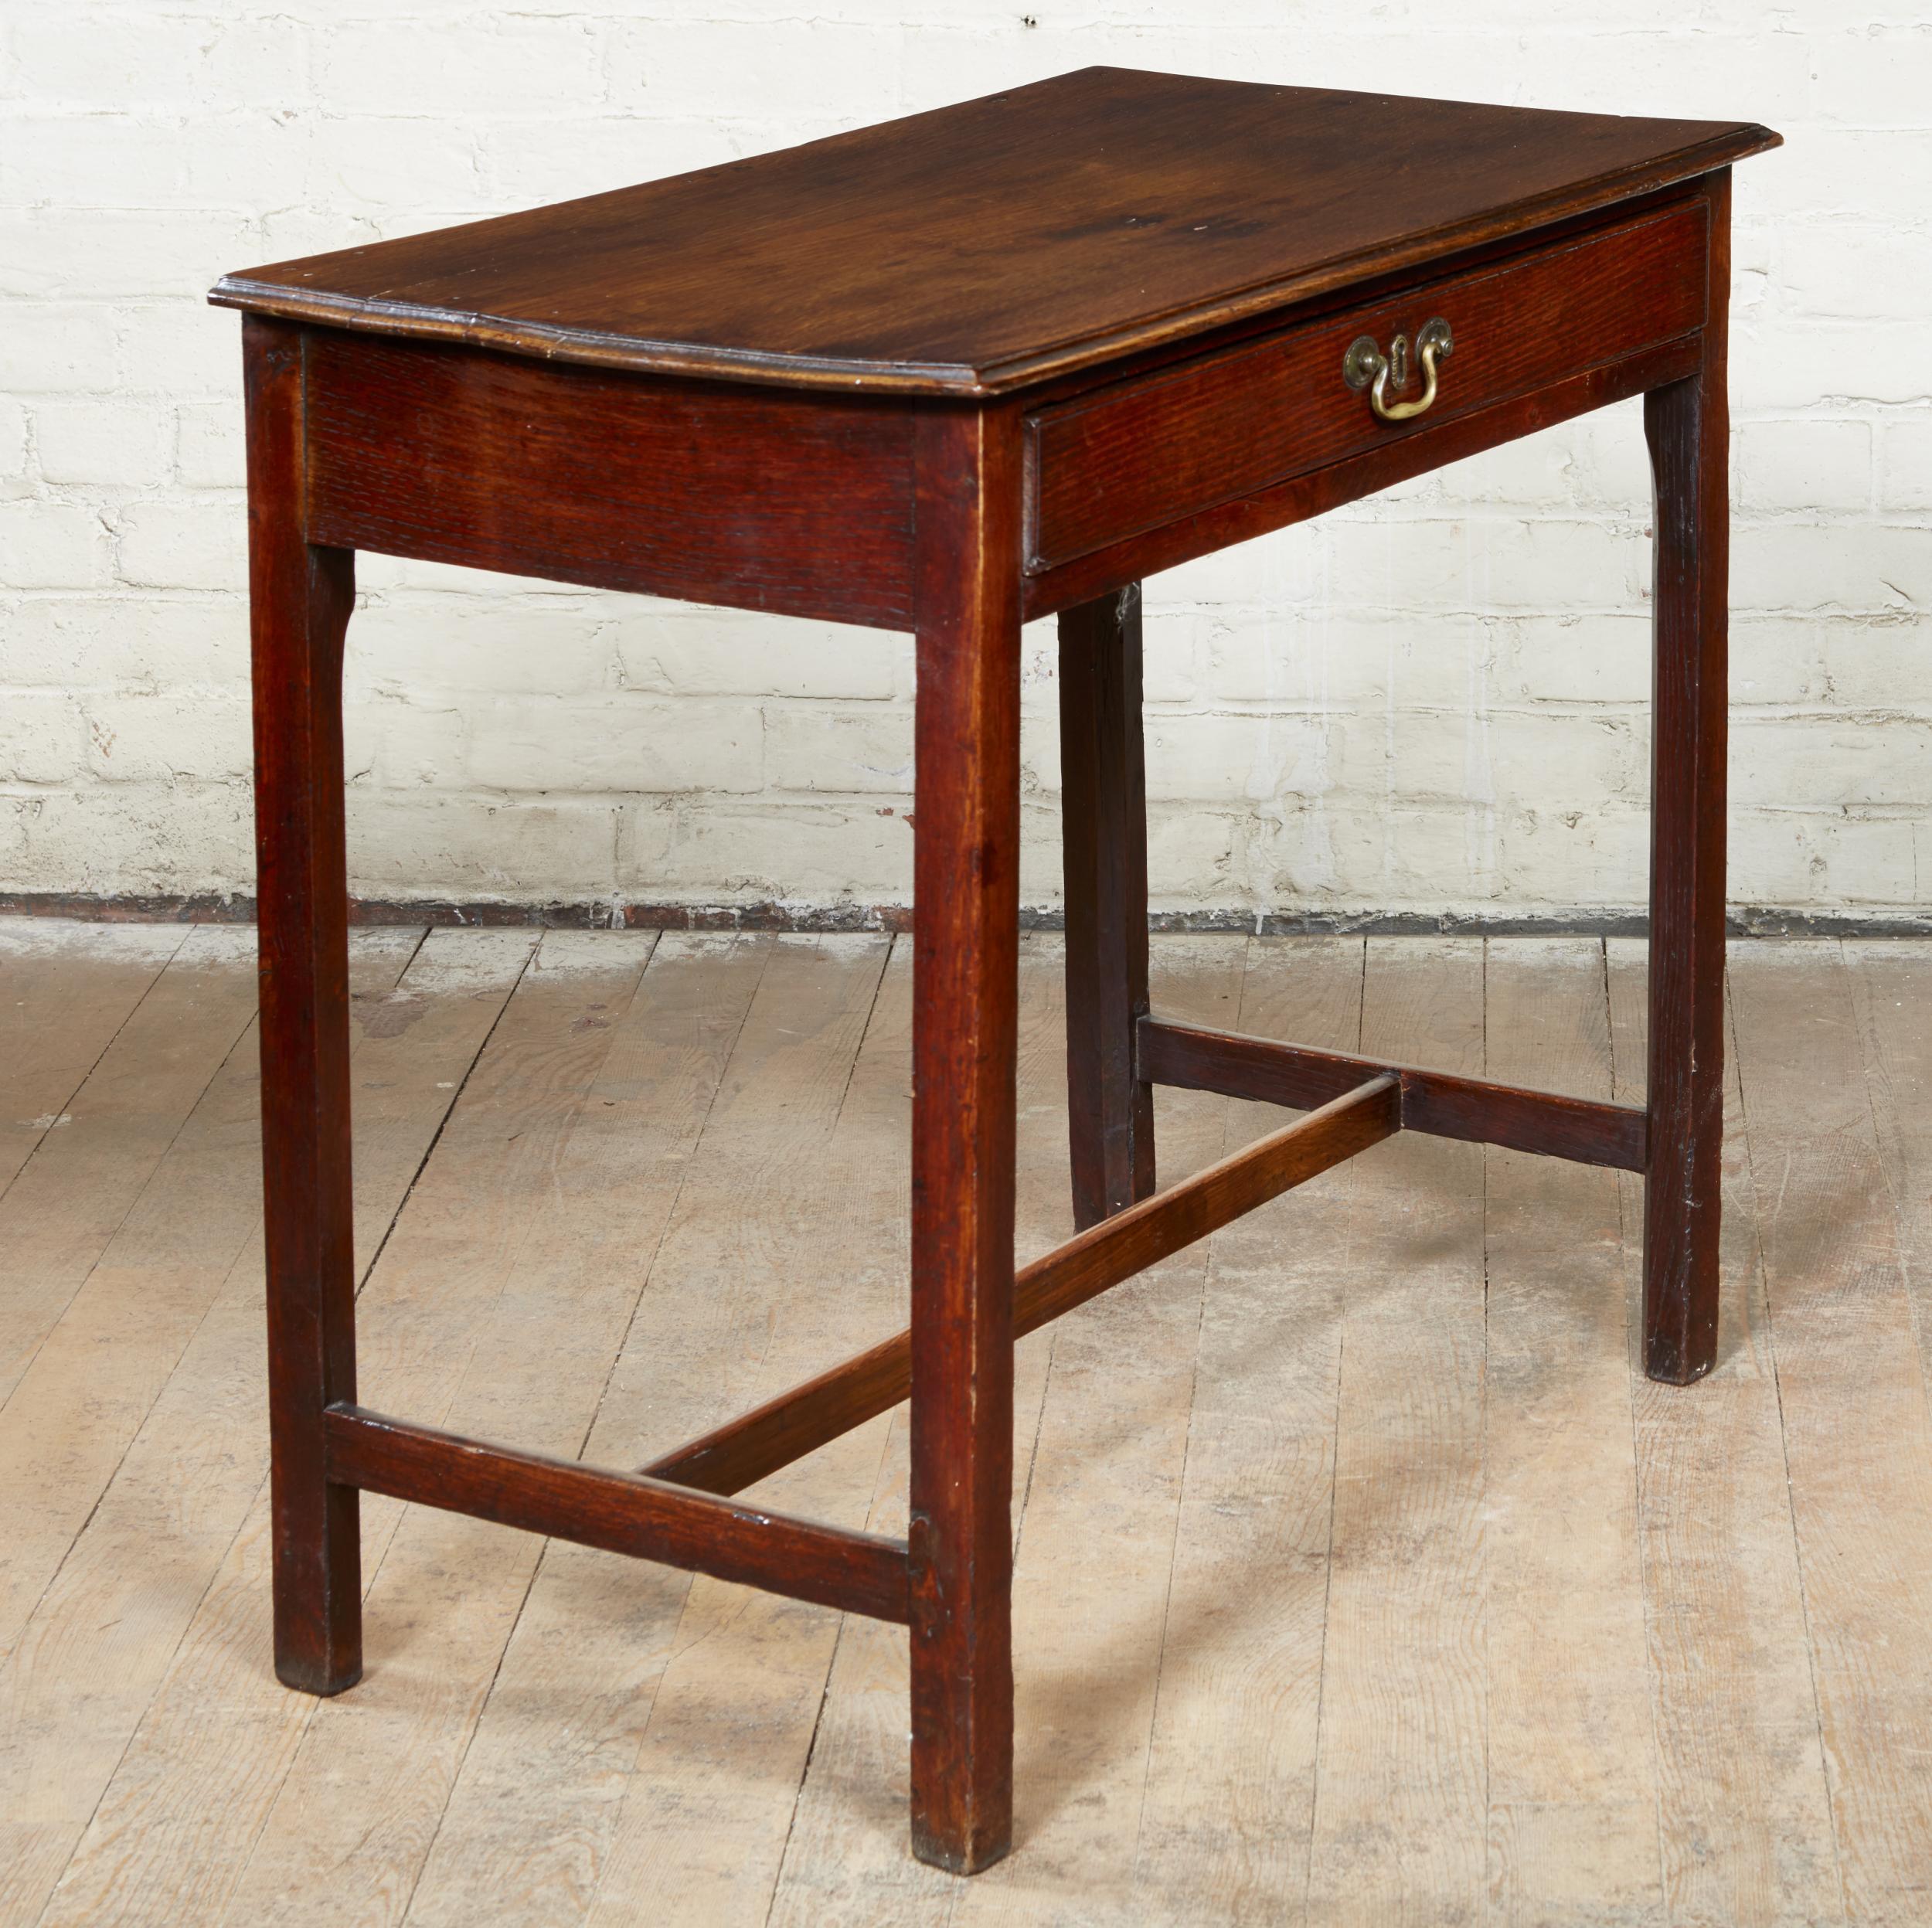 George III oak side table having an ogee molded top over single drawer, the square legs joined by 